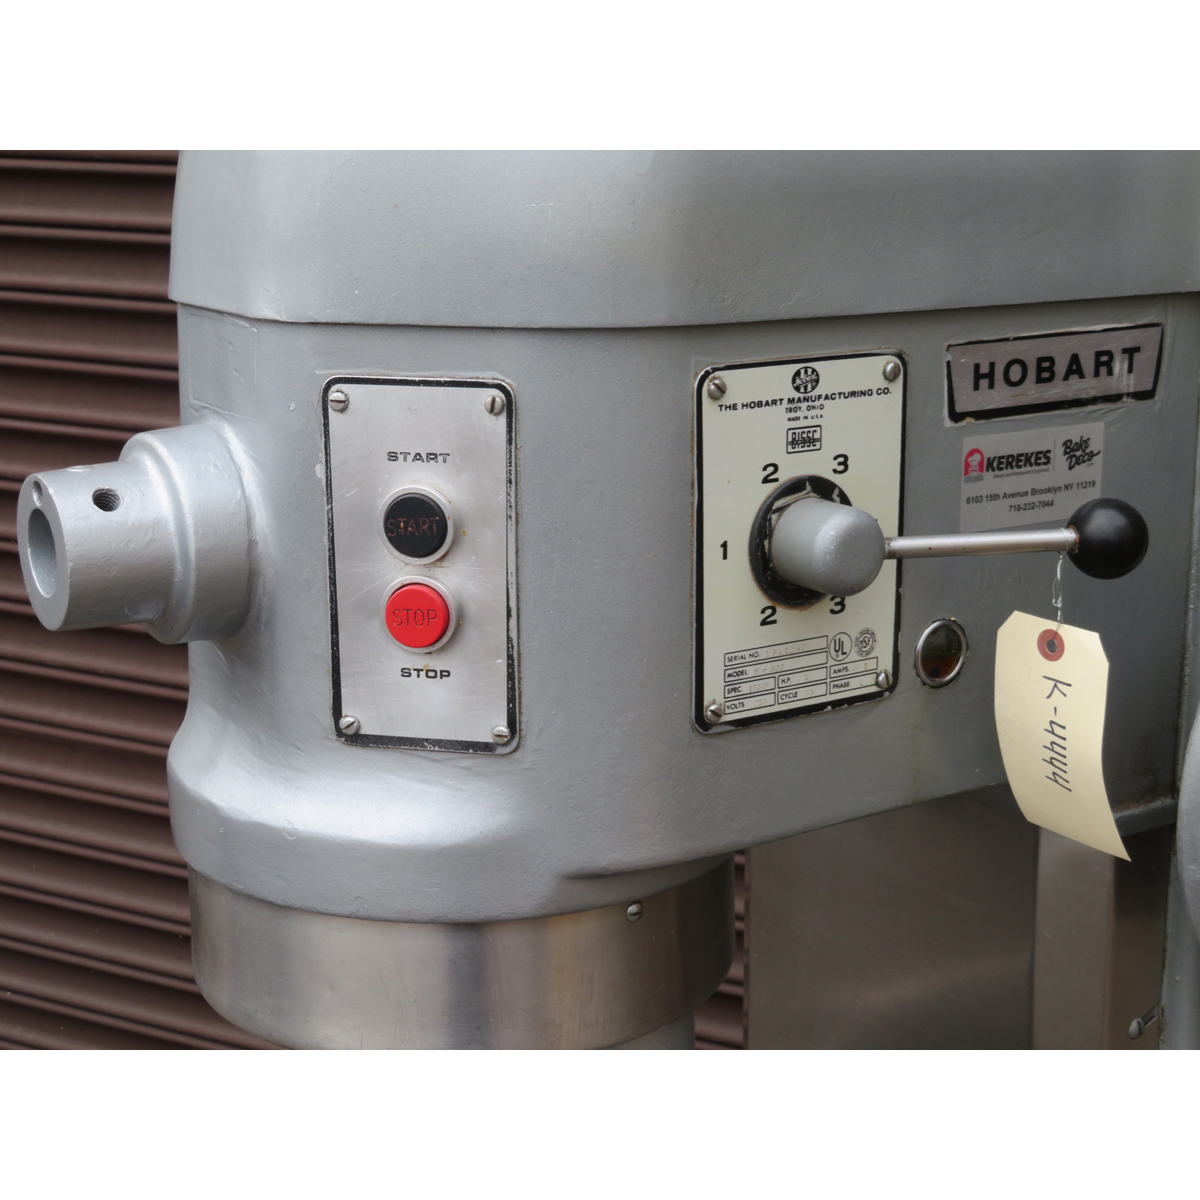 Hobart 60 Quart H600 Mixer, Used Great Condition image 1